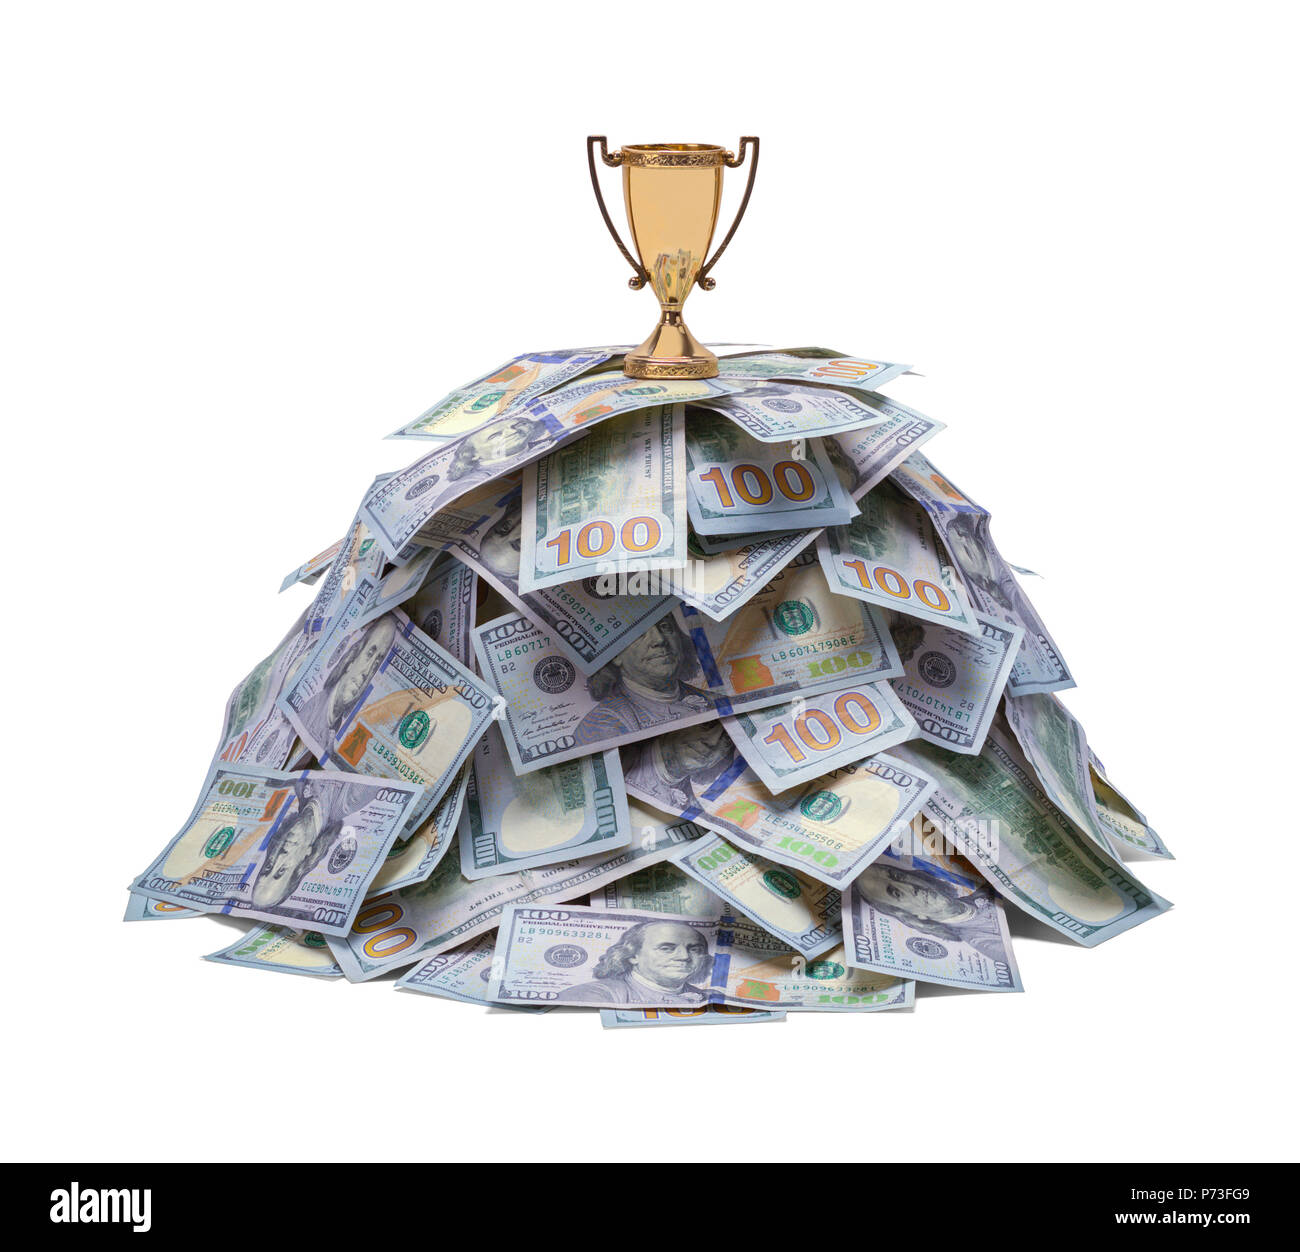 Pile of Money with Gold Trophy Isolated on White. Stock Photo